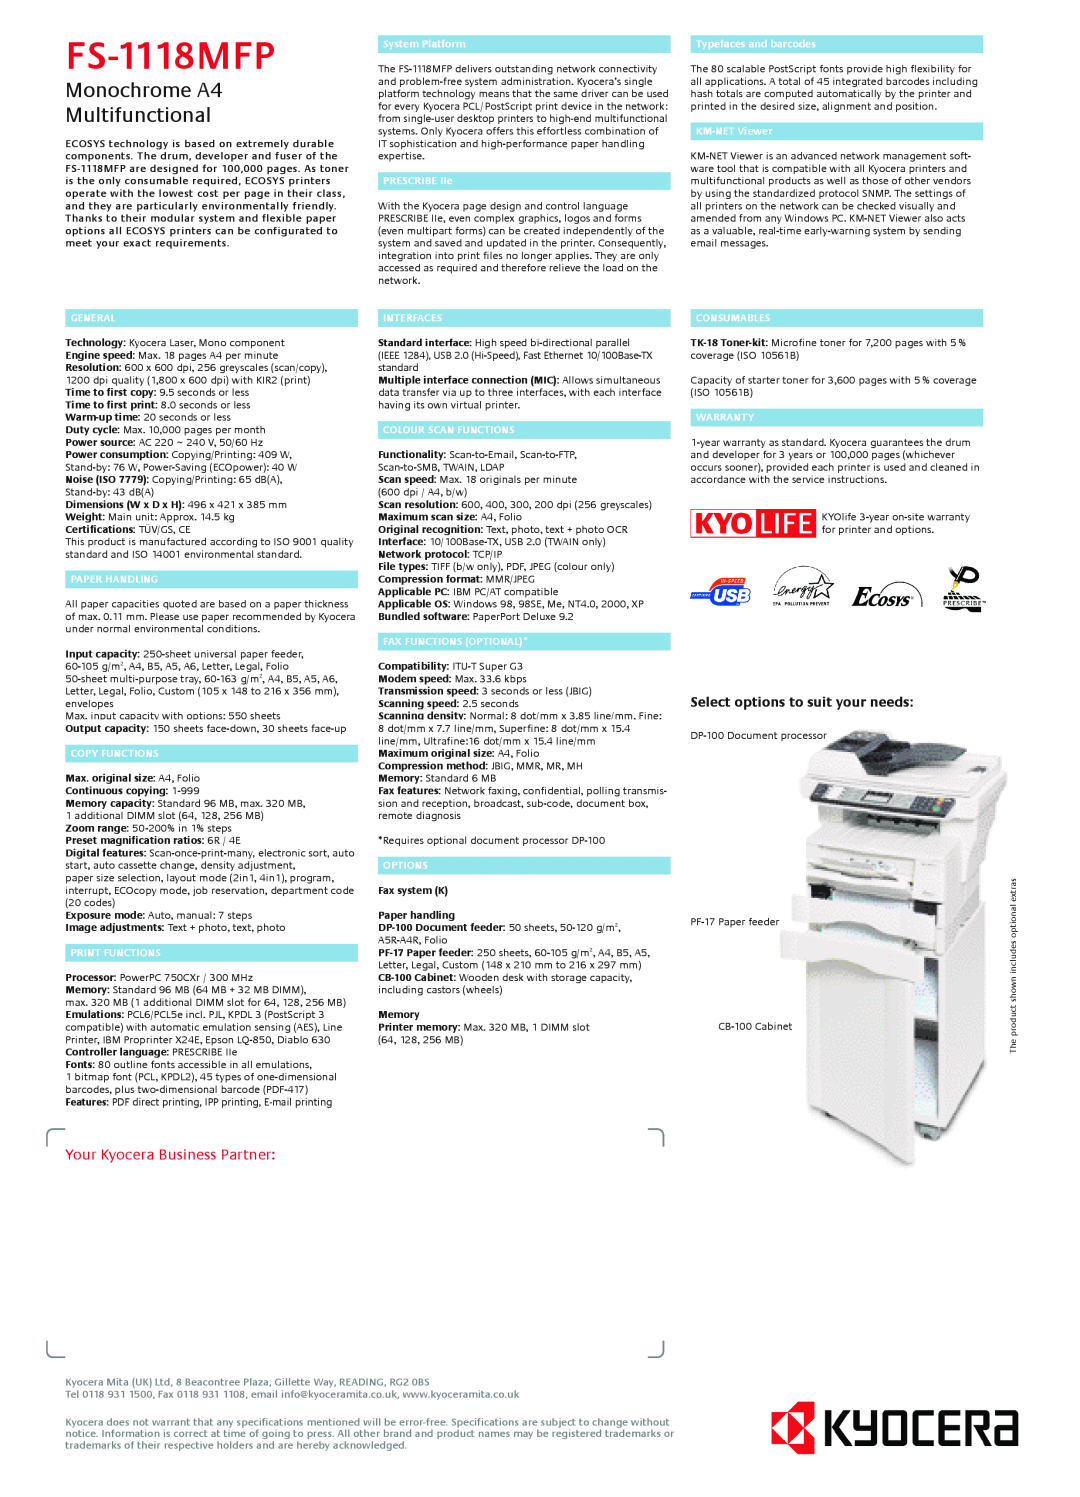 Kyocera FS-1118MFP manual Monochrome A4 Multifunctional, Your Kyocera Business Partner, Select options to suit your needs 